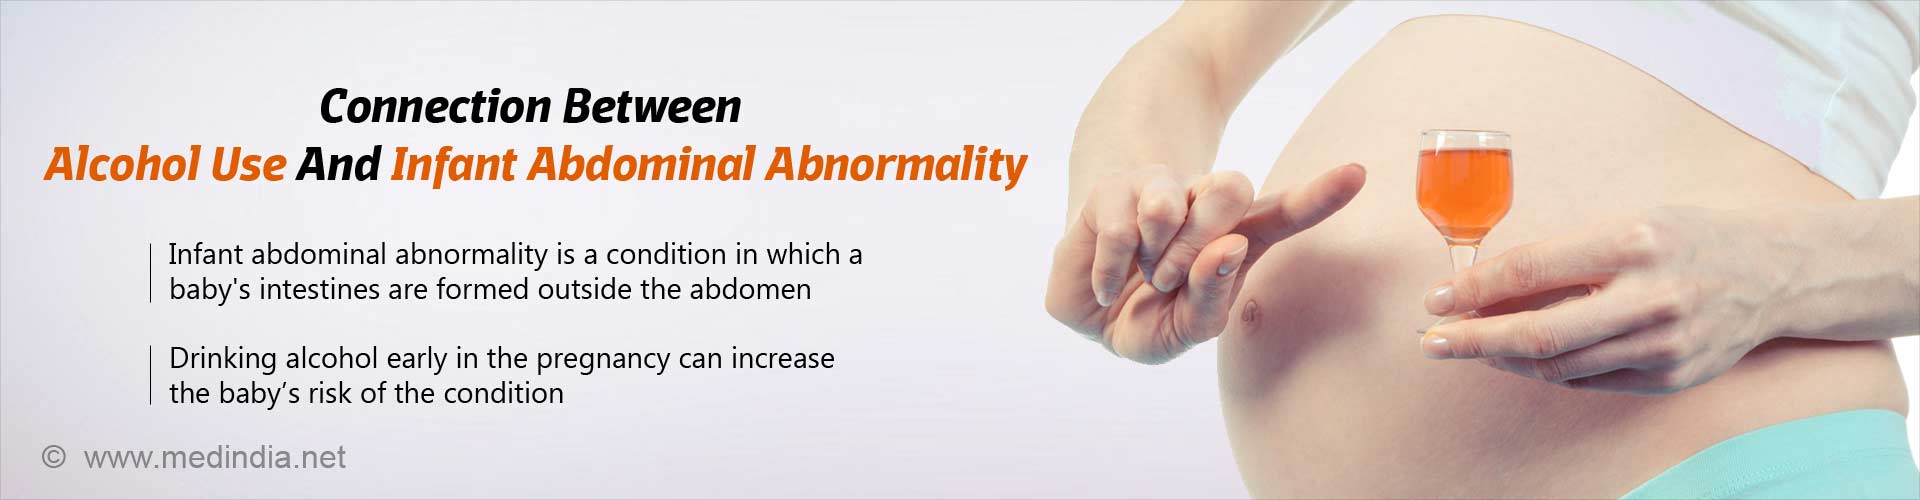 connection between alcohol use and infant abdominal abnormally
- infant abdominal abnormality is a condition in which a baby's intestines are formed outside the abdomen
- drinking alcohol early in the pregnancy can increase the baby's risk of the condition